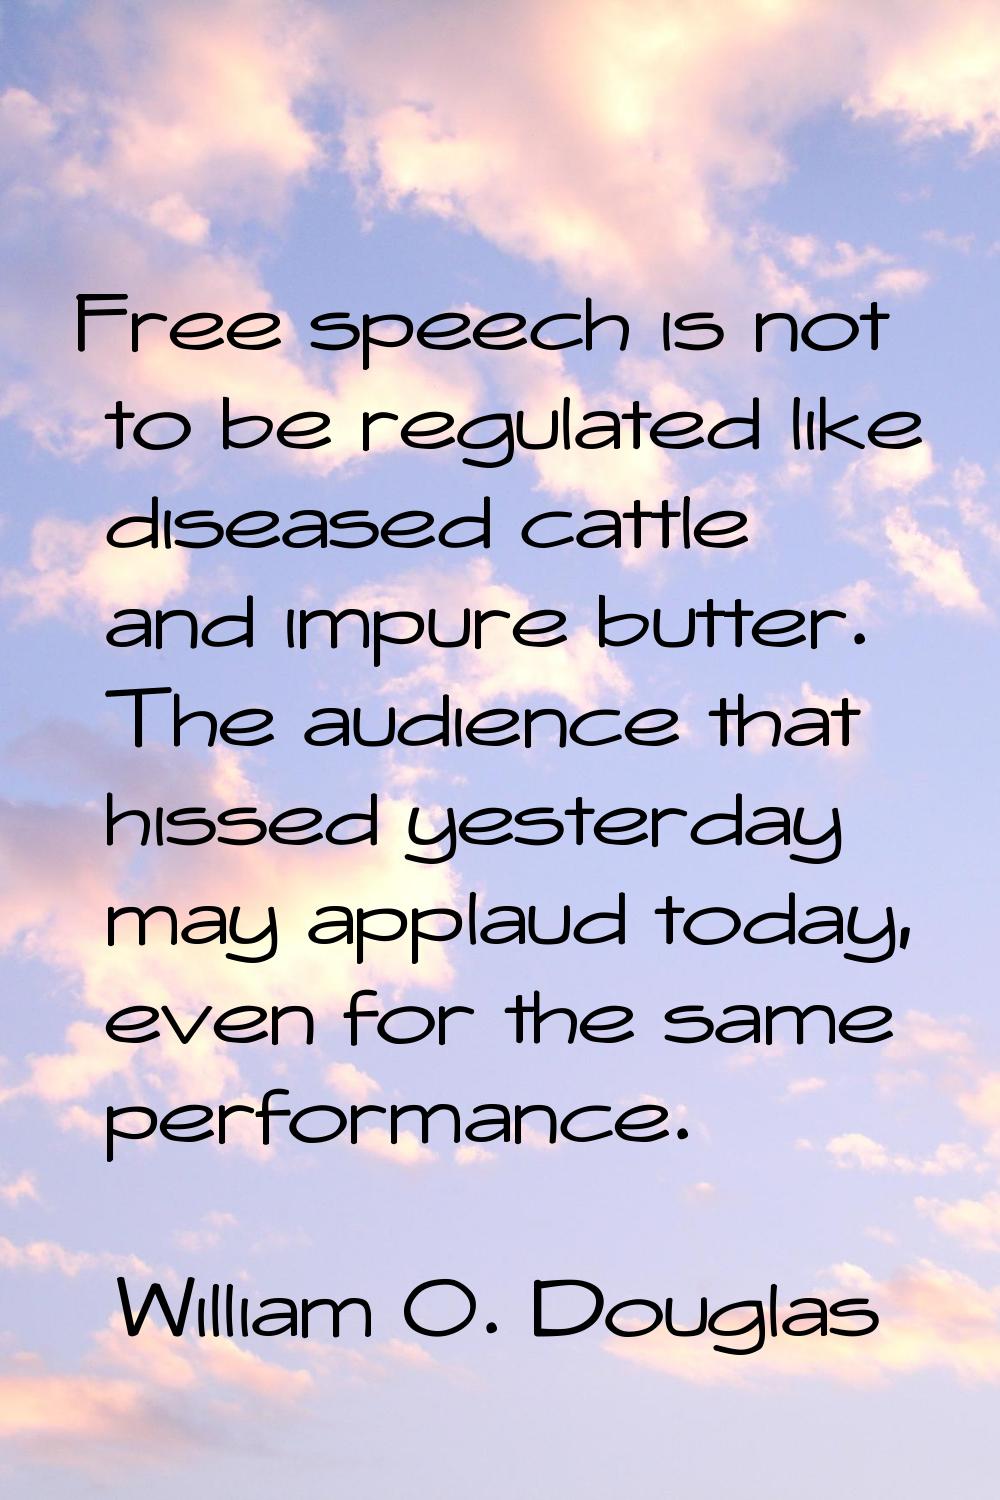 Free speech is not to be regulated like diseased cattle and impure butter. The audience that hissed